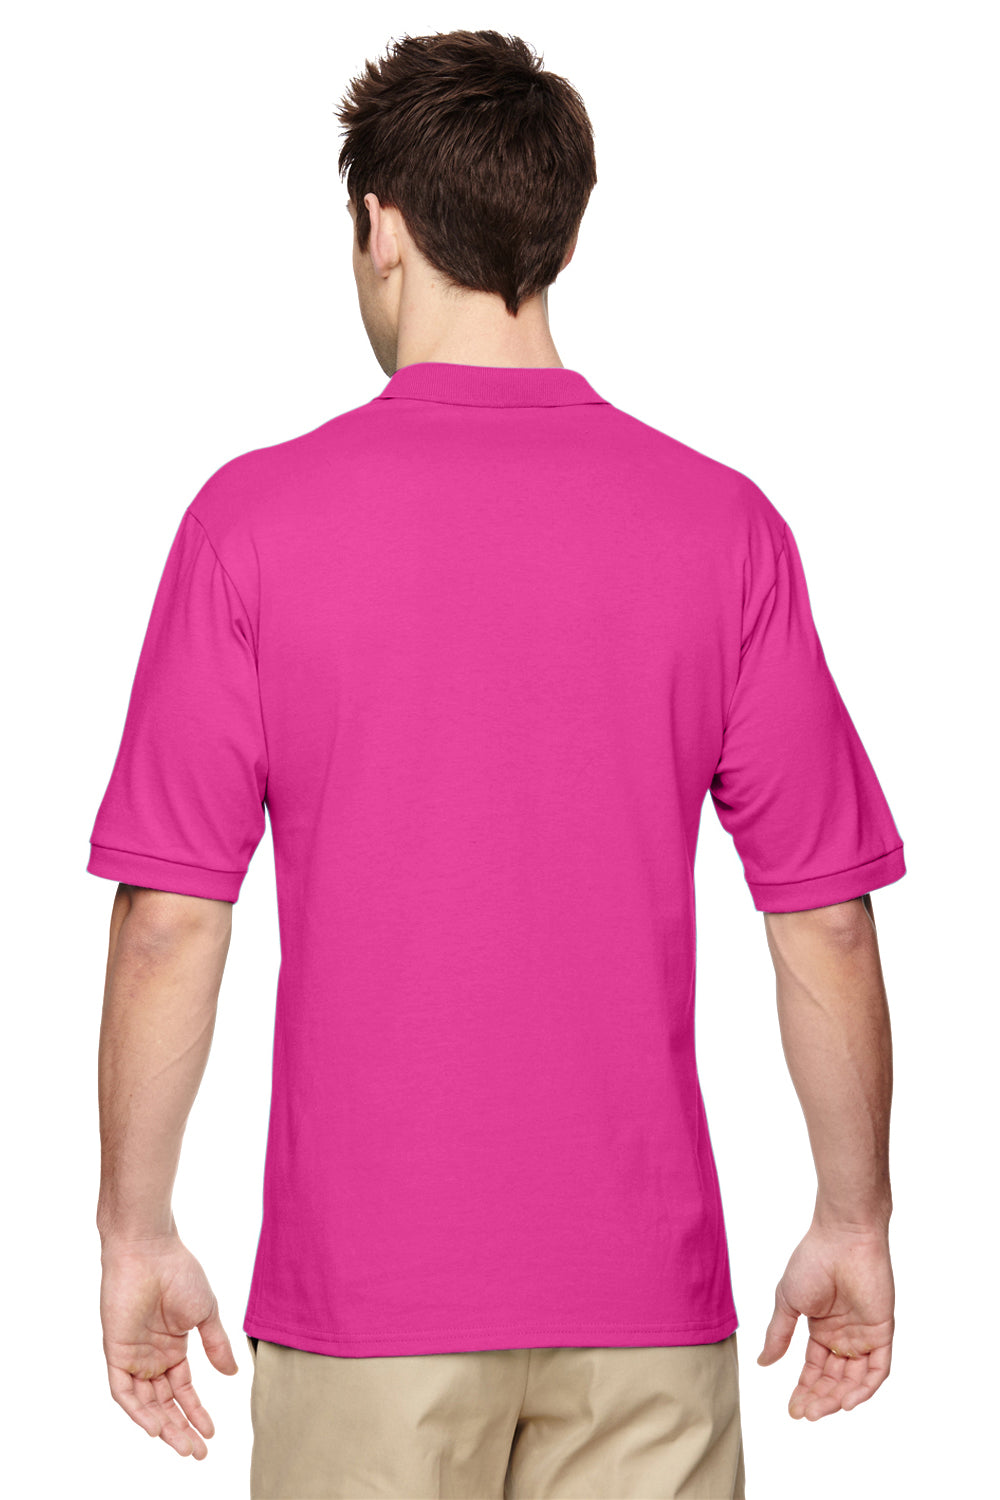 Jerzees 437 Mens SpotShield Stain Resistant Short Sleeve Polo Shirt Cyber Pink Back